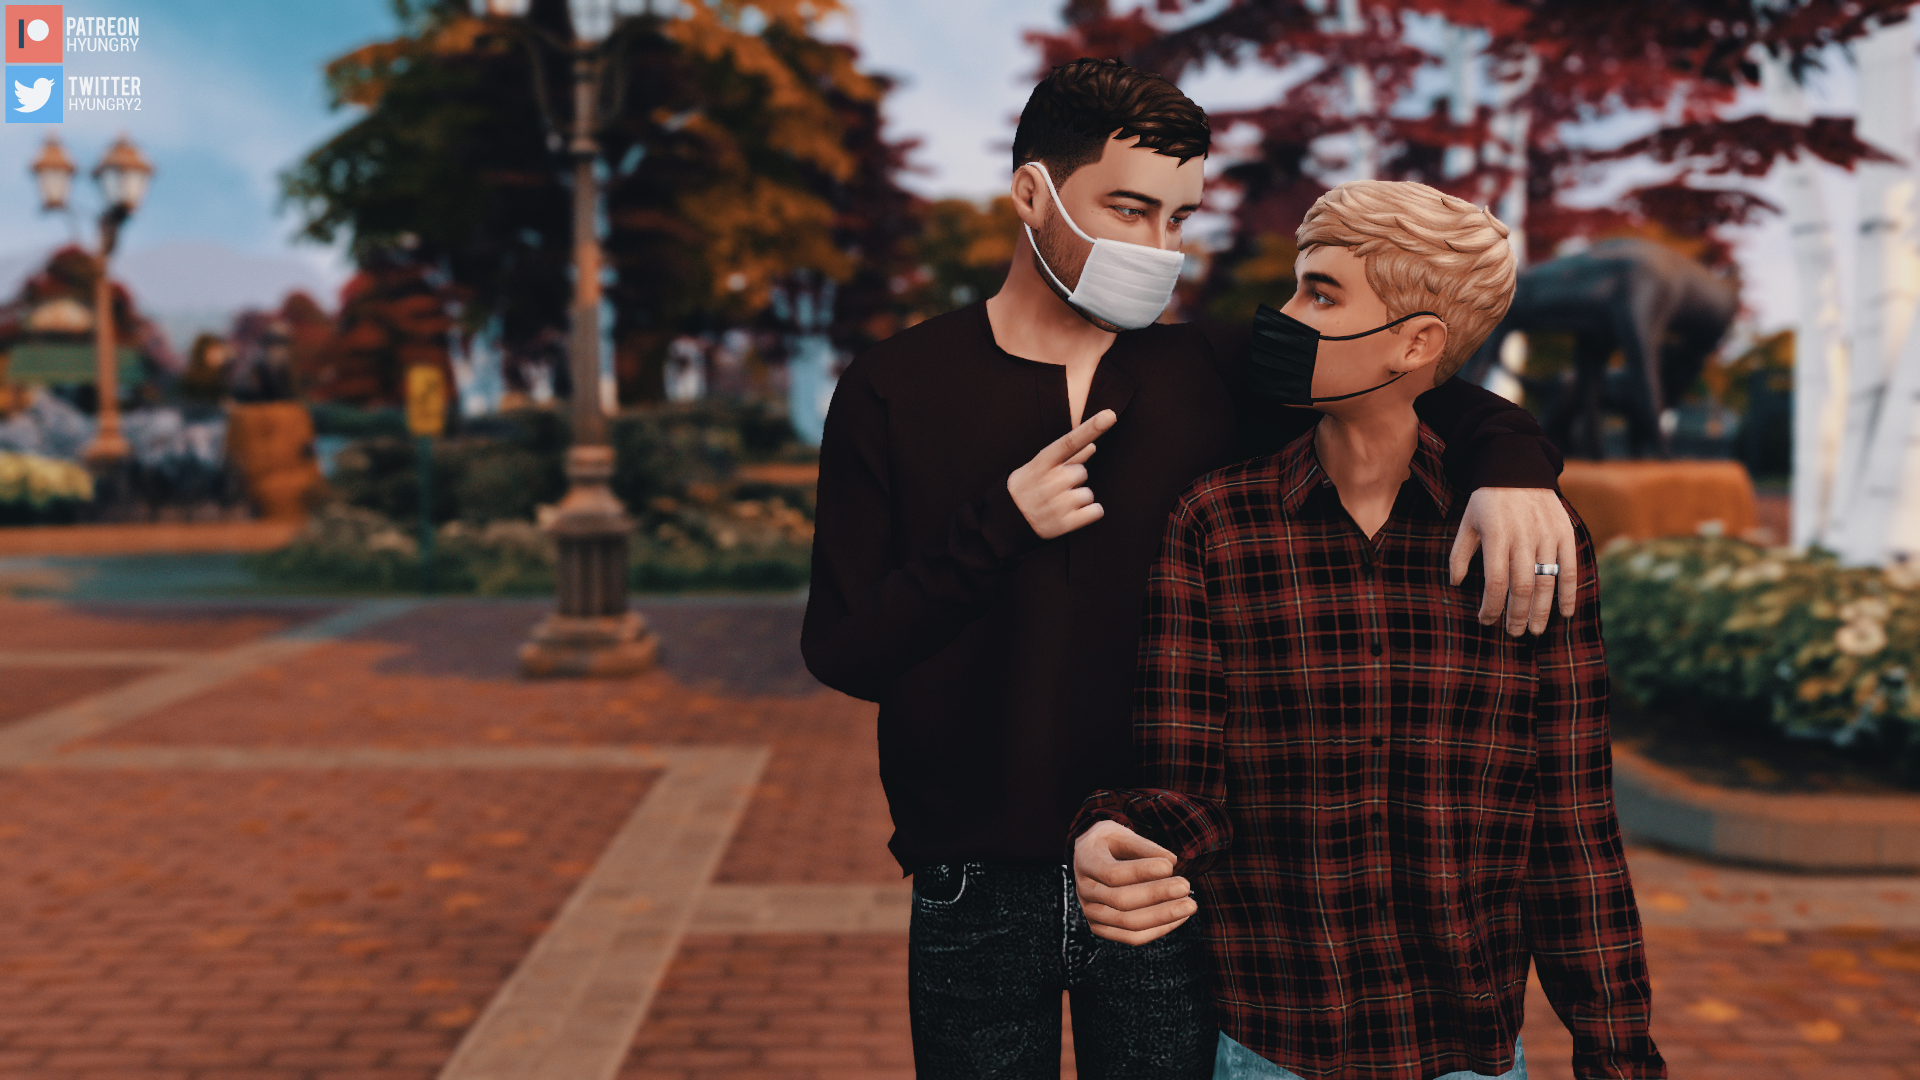 Hyungrys Gay Machinima Collection New 72520 Page 4 The Sims 4 